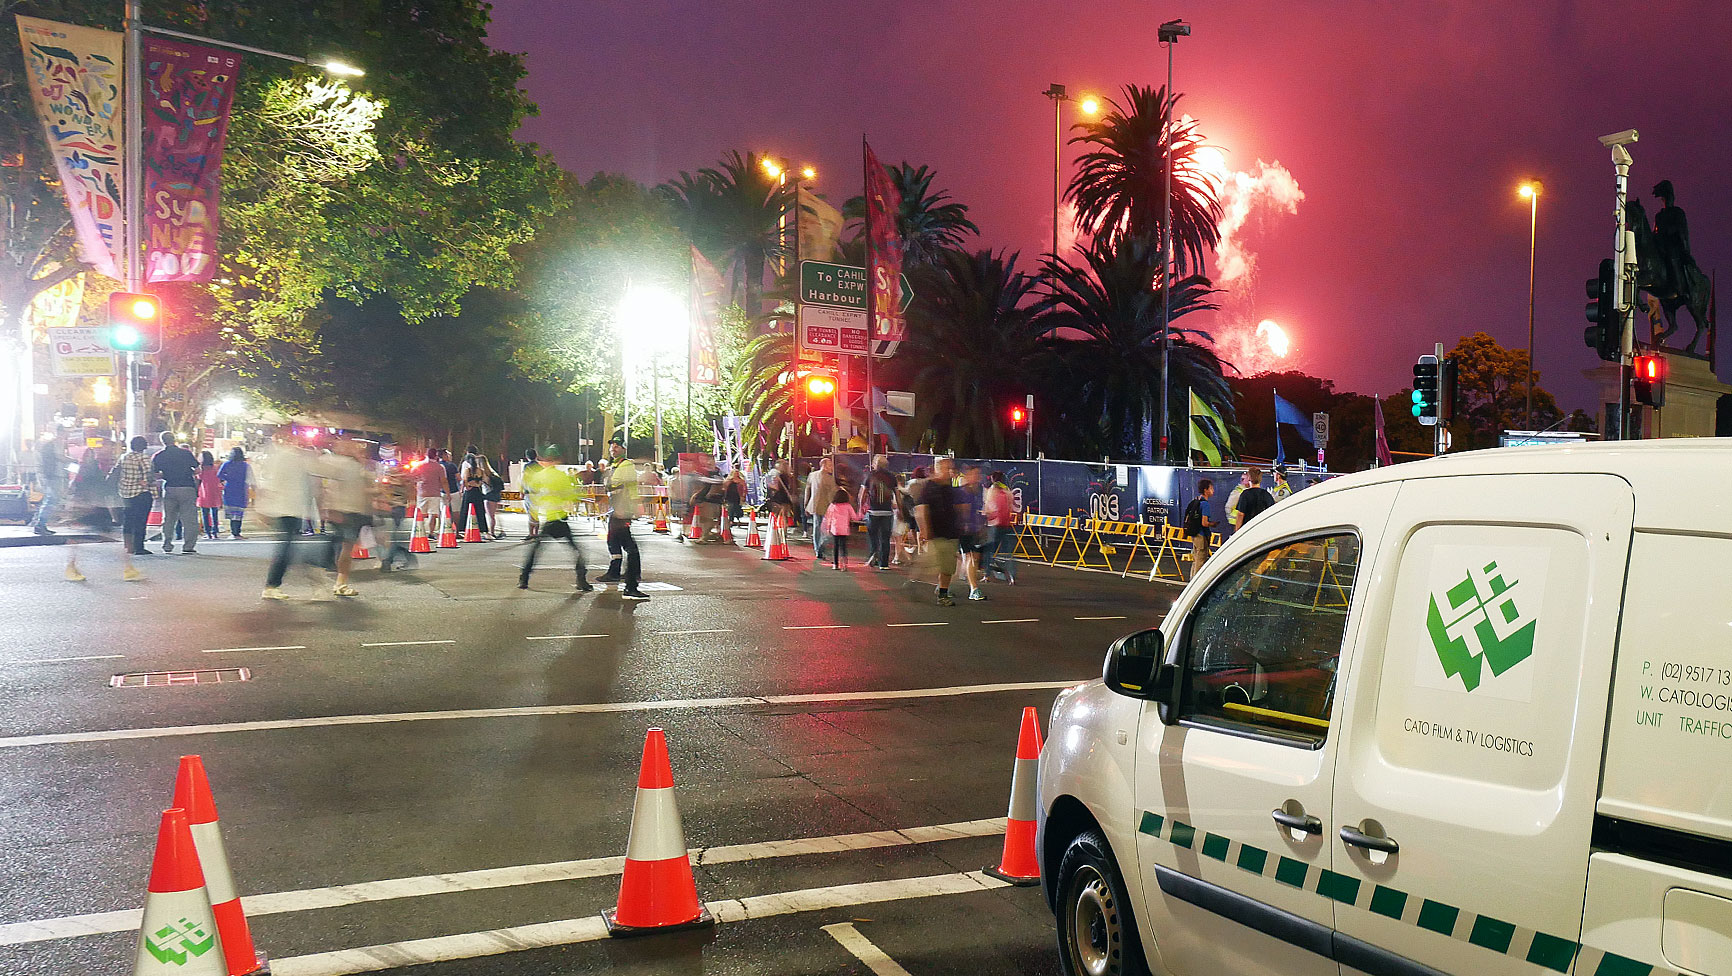 Pedestrian managementOver 1 million people attend Sydney's New Years celebration. Cato location services helped manage and keep safe the enormous amount of attendees that saw the fireworks.